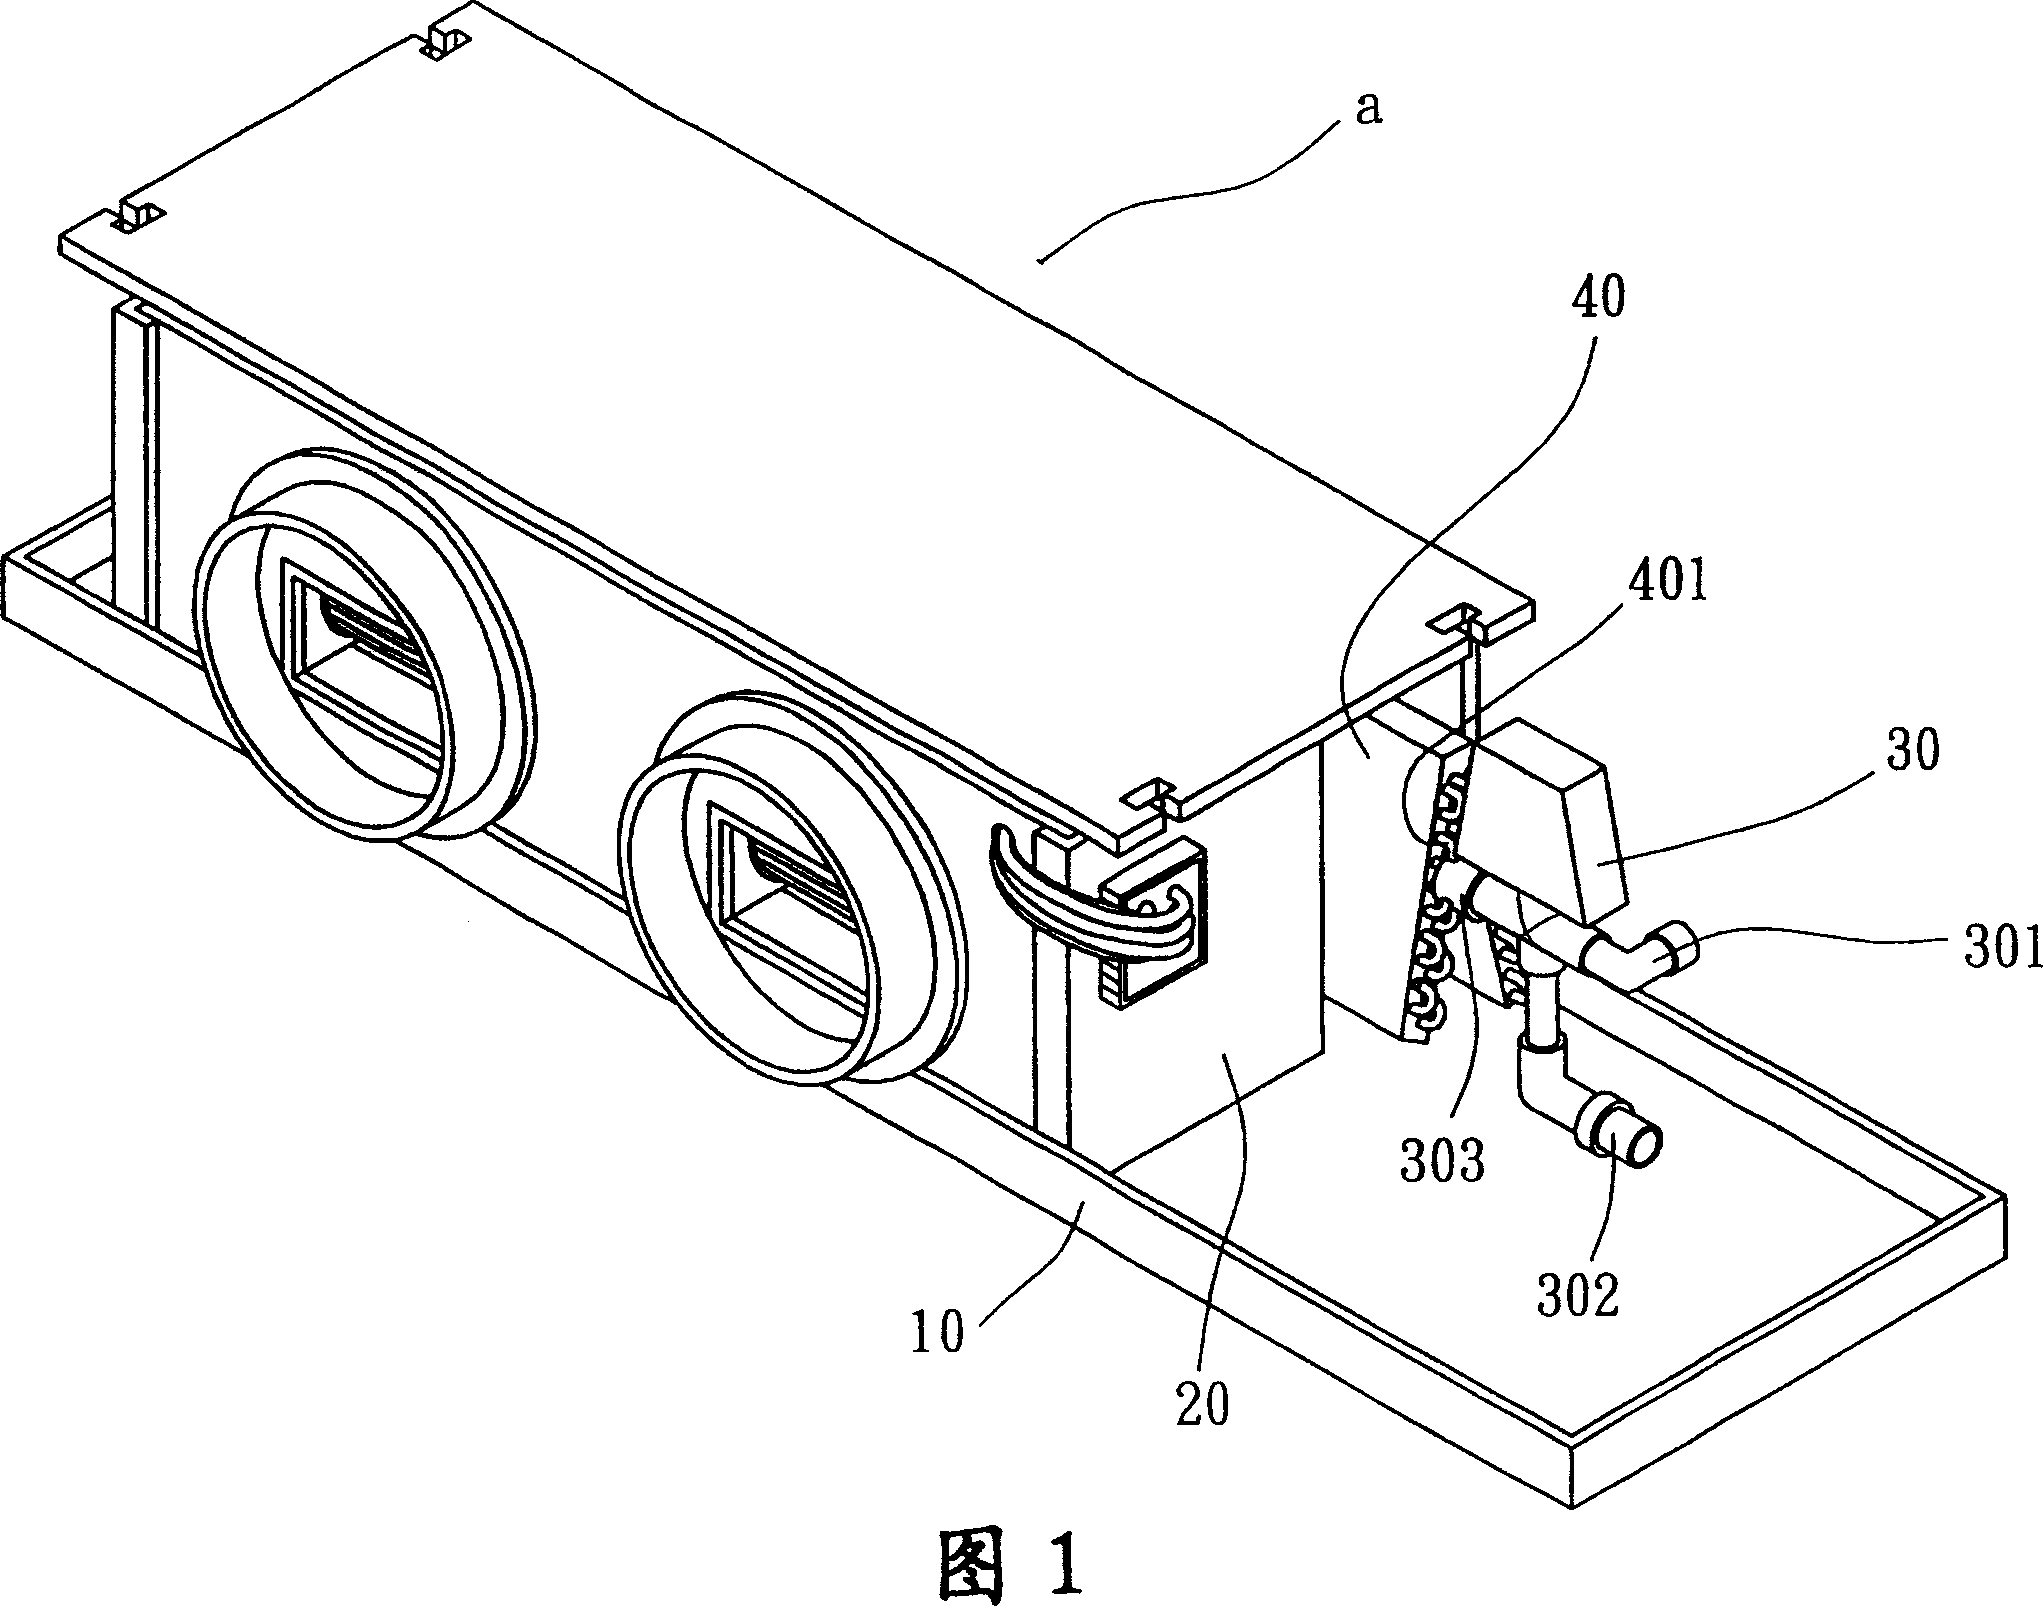 Structure of wall air conditioner